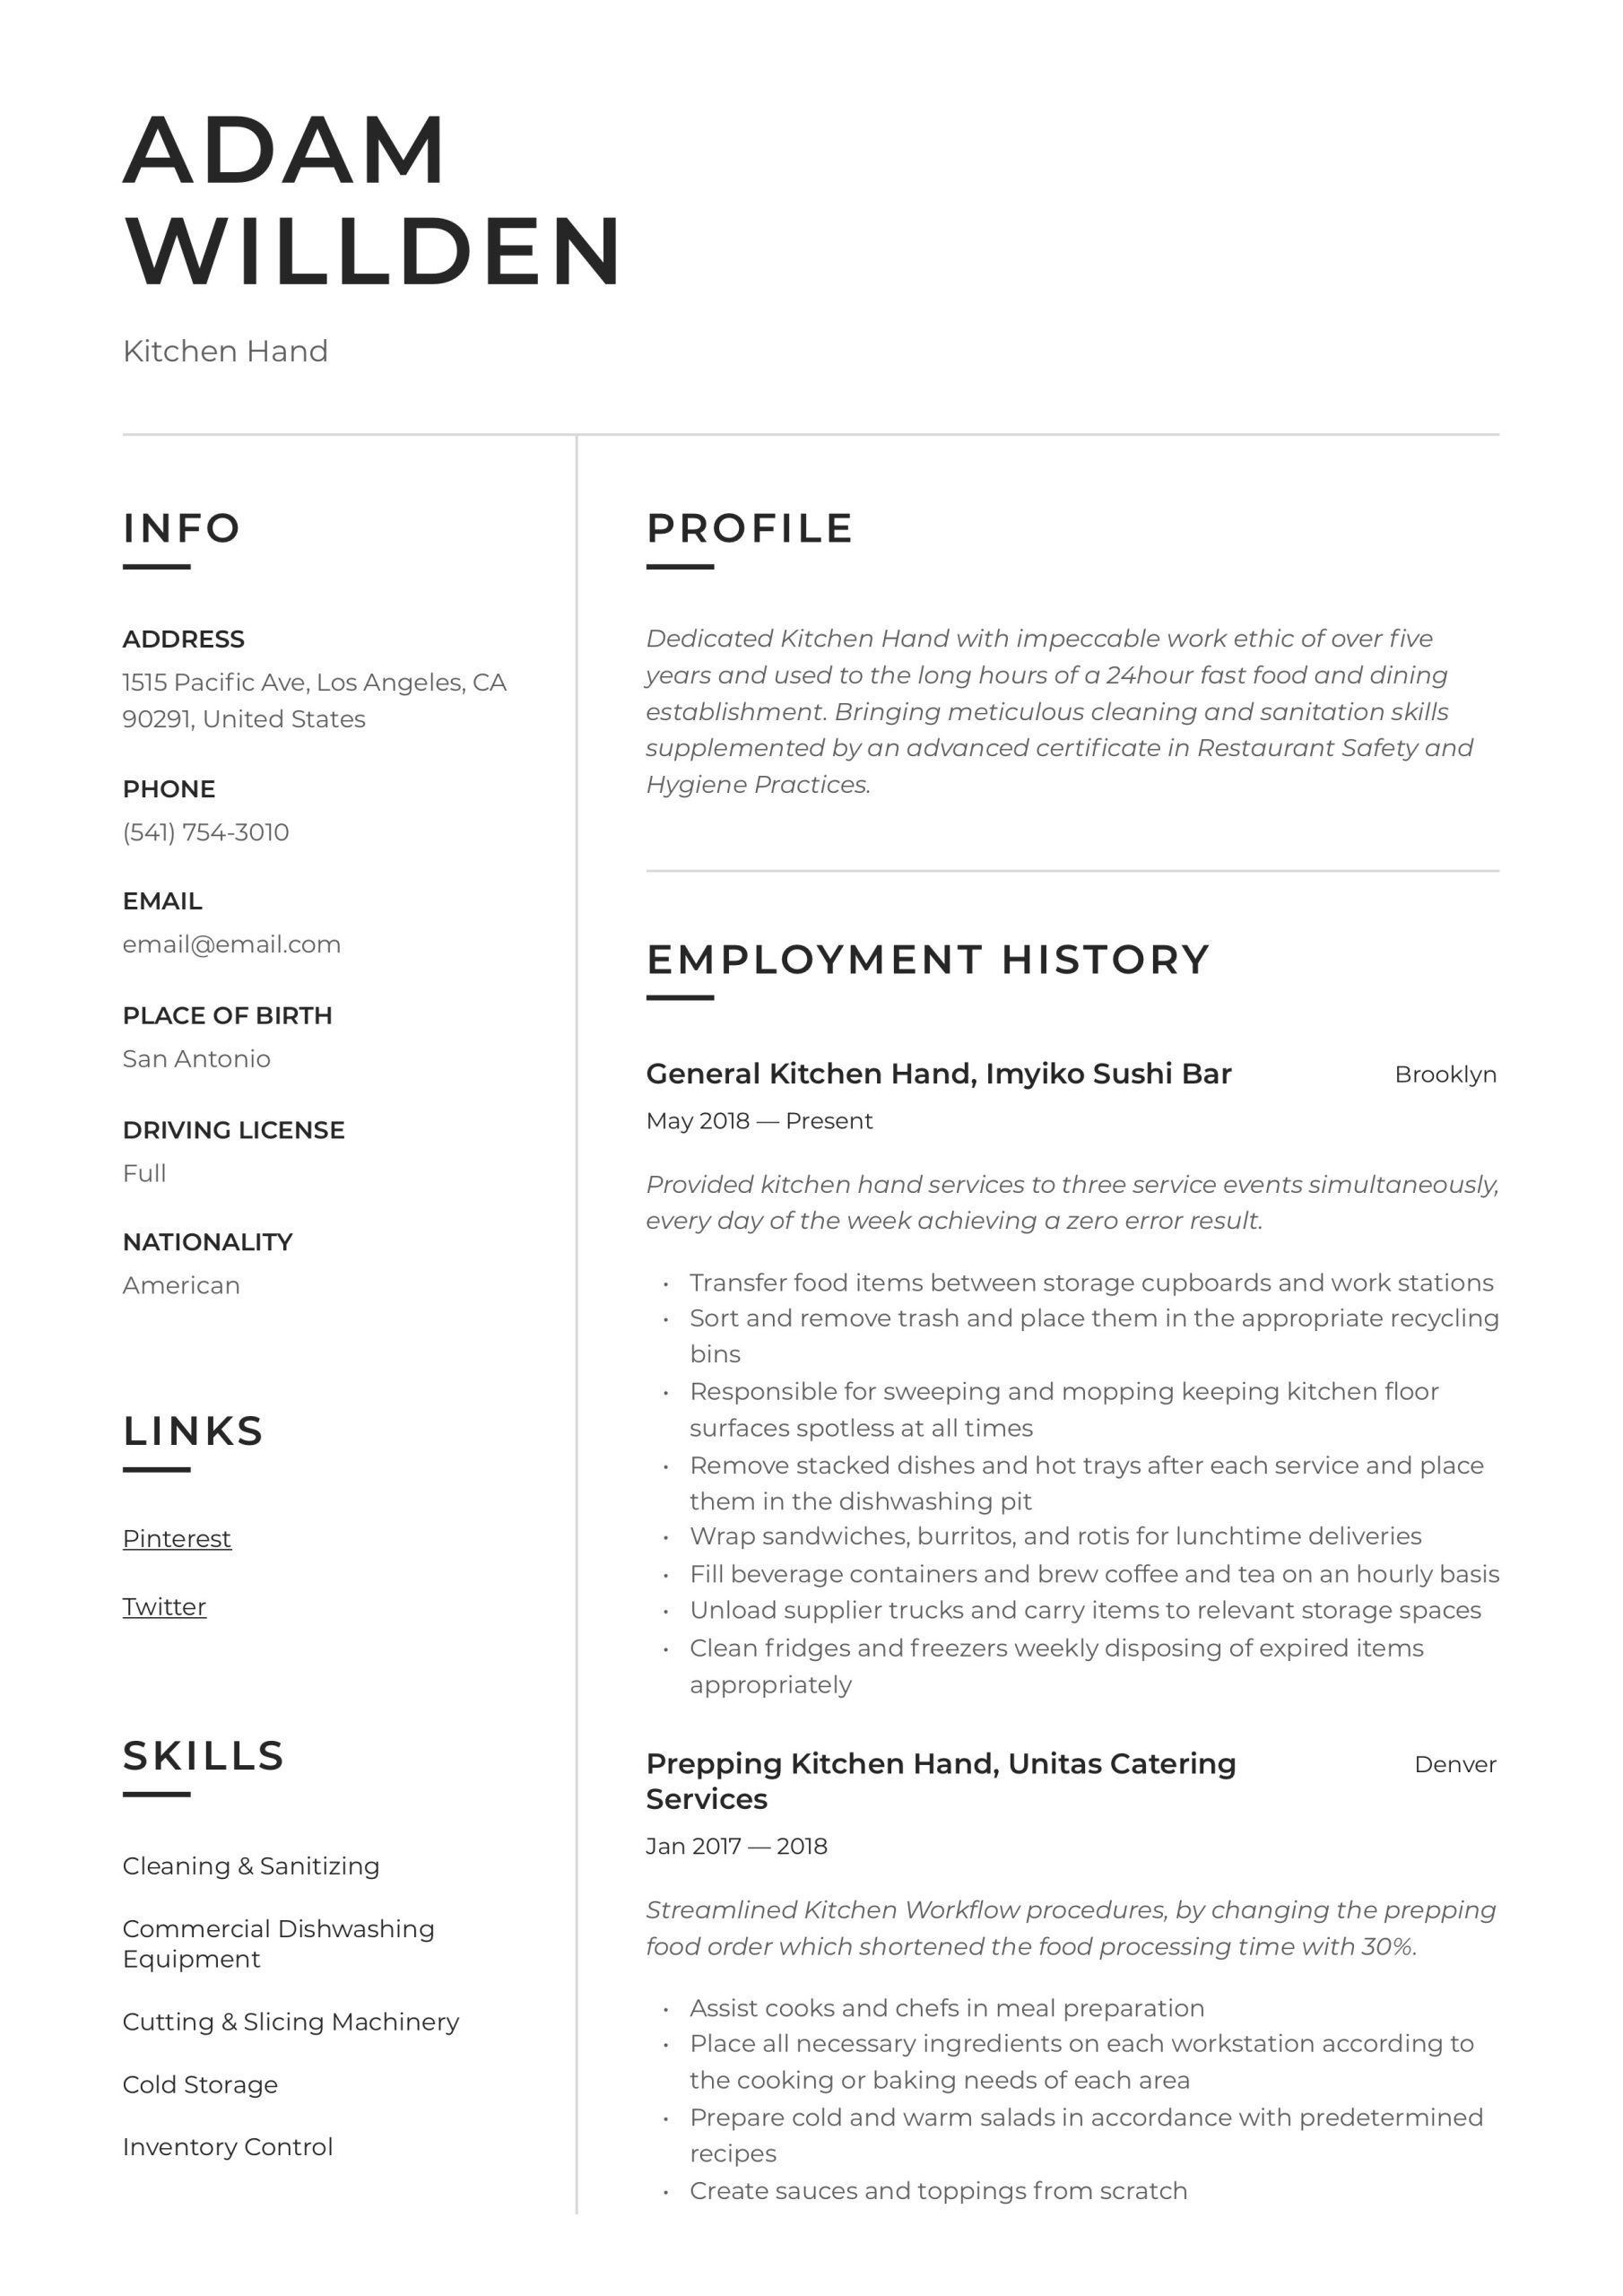 Resume Sample High School Student Dishwasher Kitchen Hand Resume & Writing Guide  12 Free Templates 2020